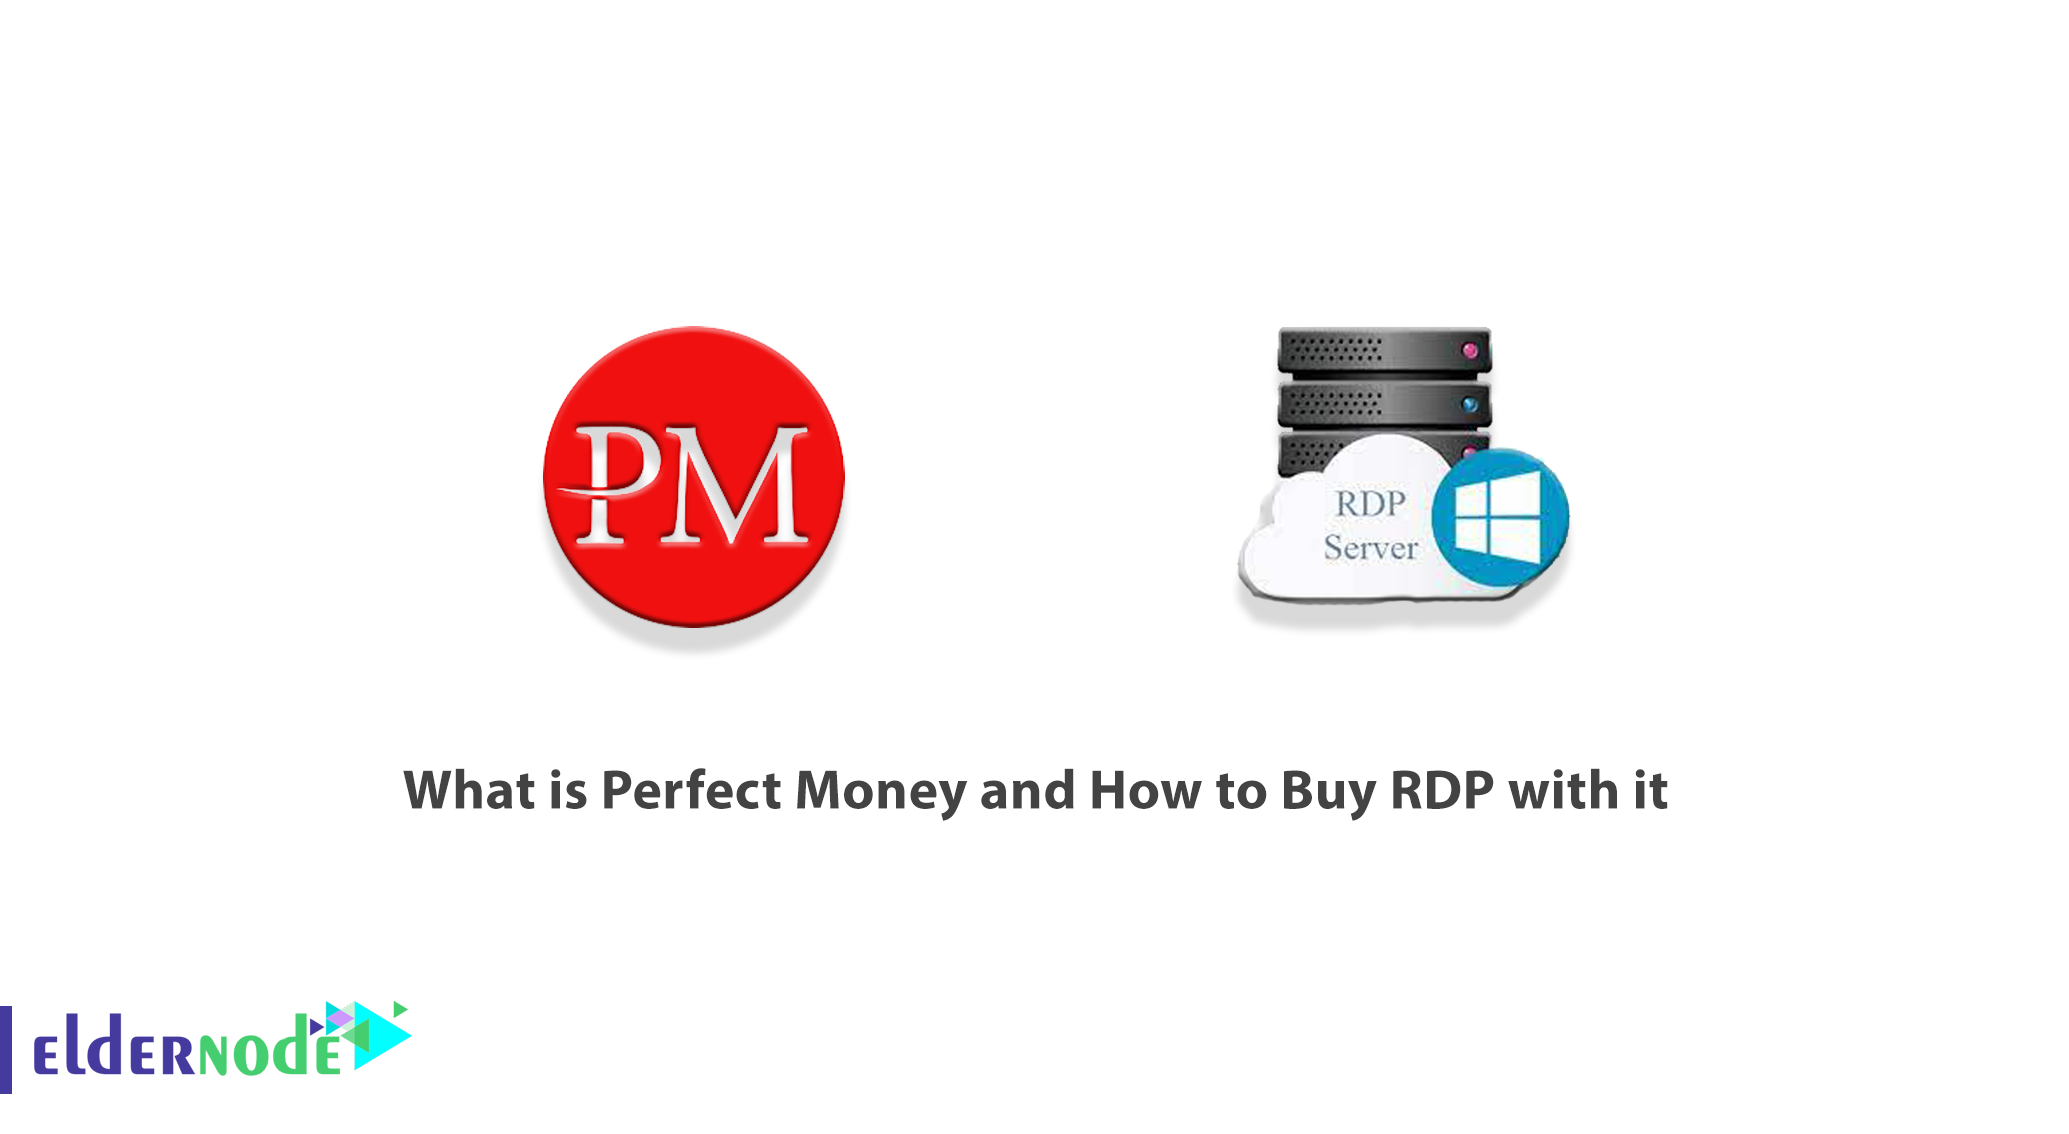 What is Perfect Money and How to Buy RDP with it